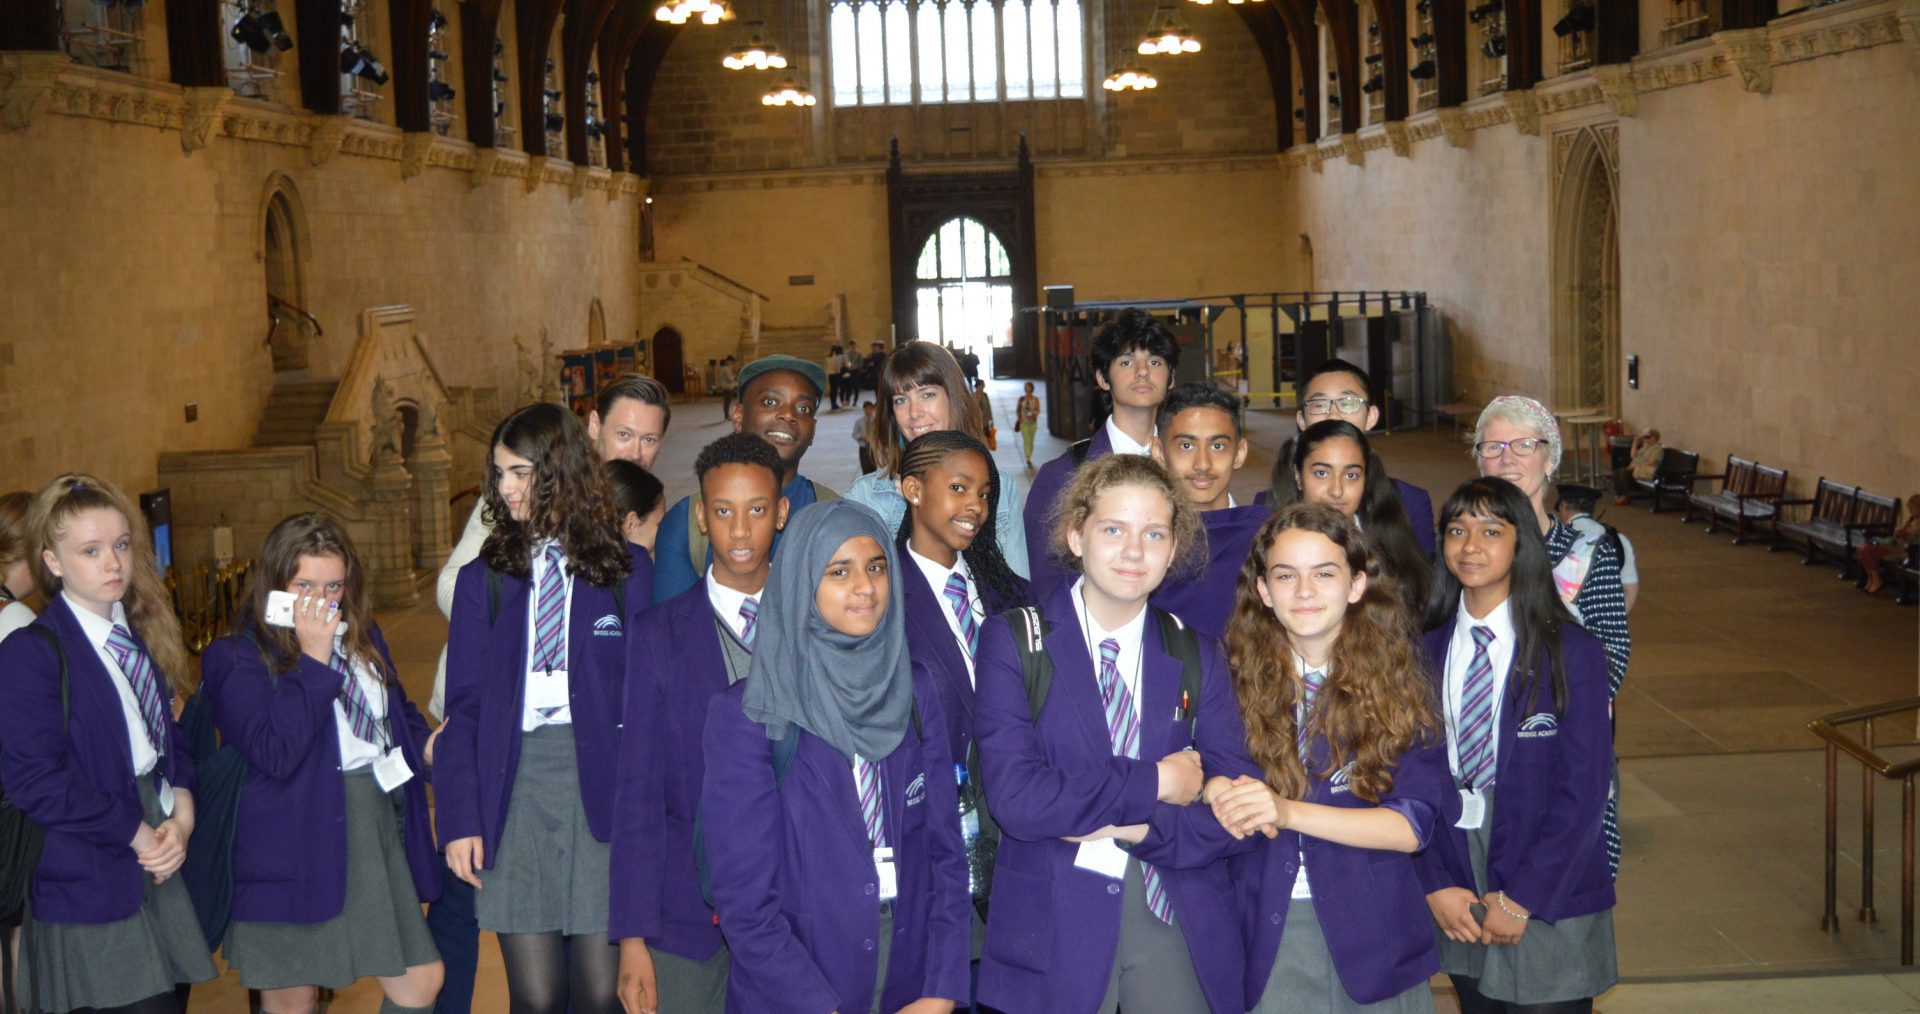 Bridge Academy students deliver speeches at Houses of Parliament (archive)